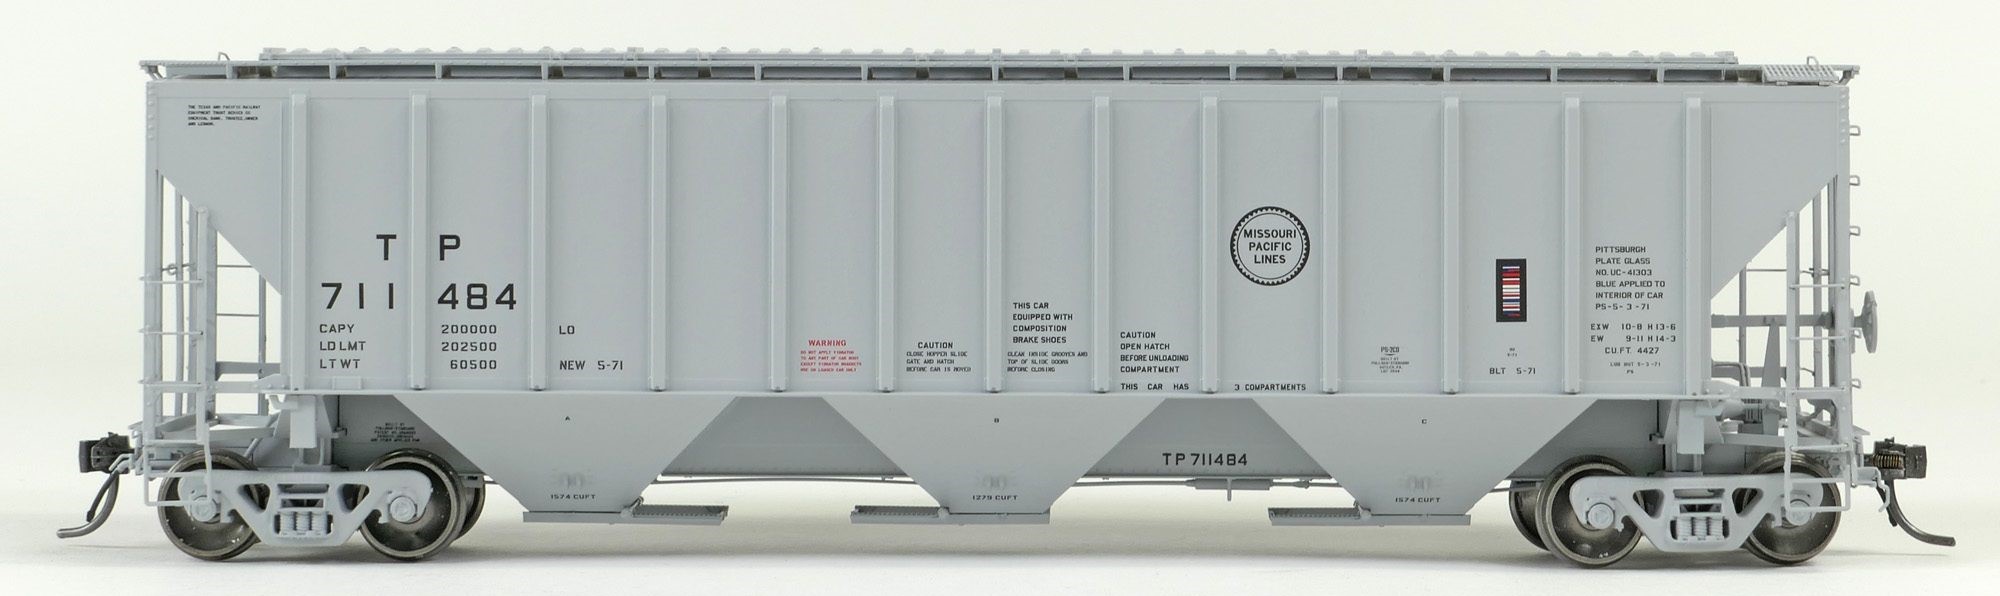 Tangent Scale Models HO 21038-03 Pullman-Standard PS-2 4427 High Side Covered Hopper Texas and Pacific 'Delivery Gray 5-1971' TP #711523